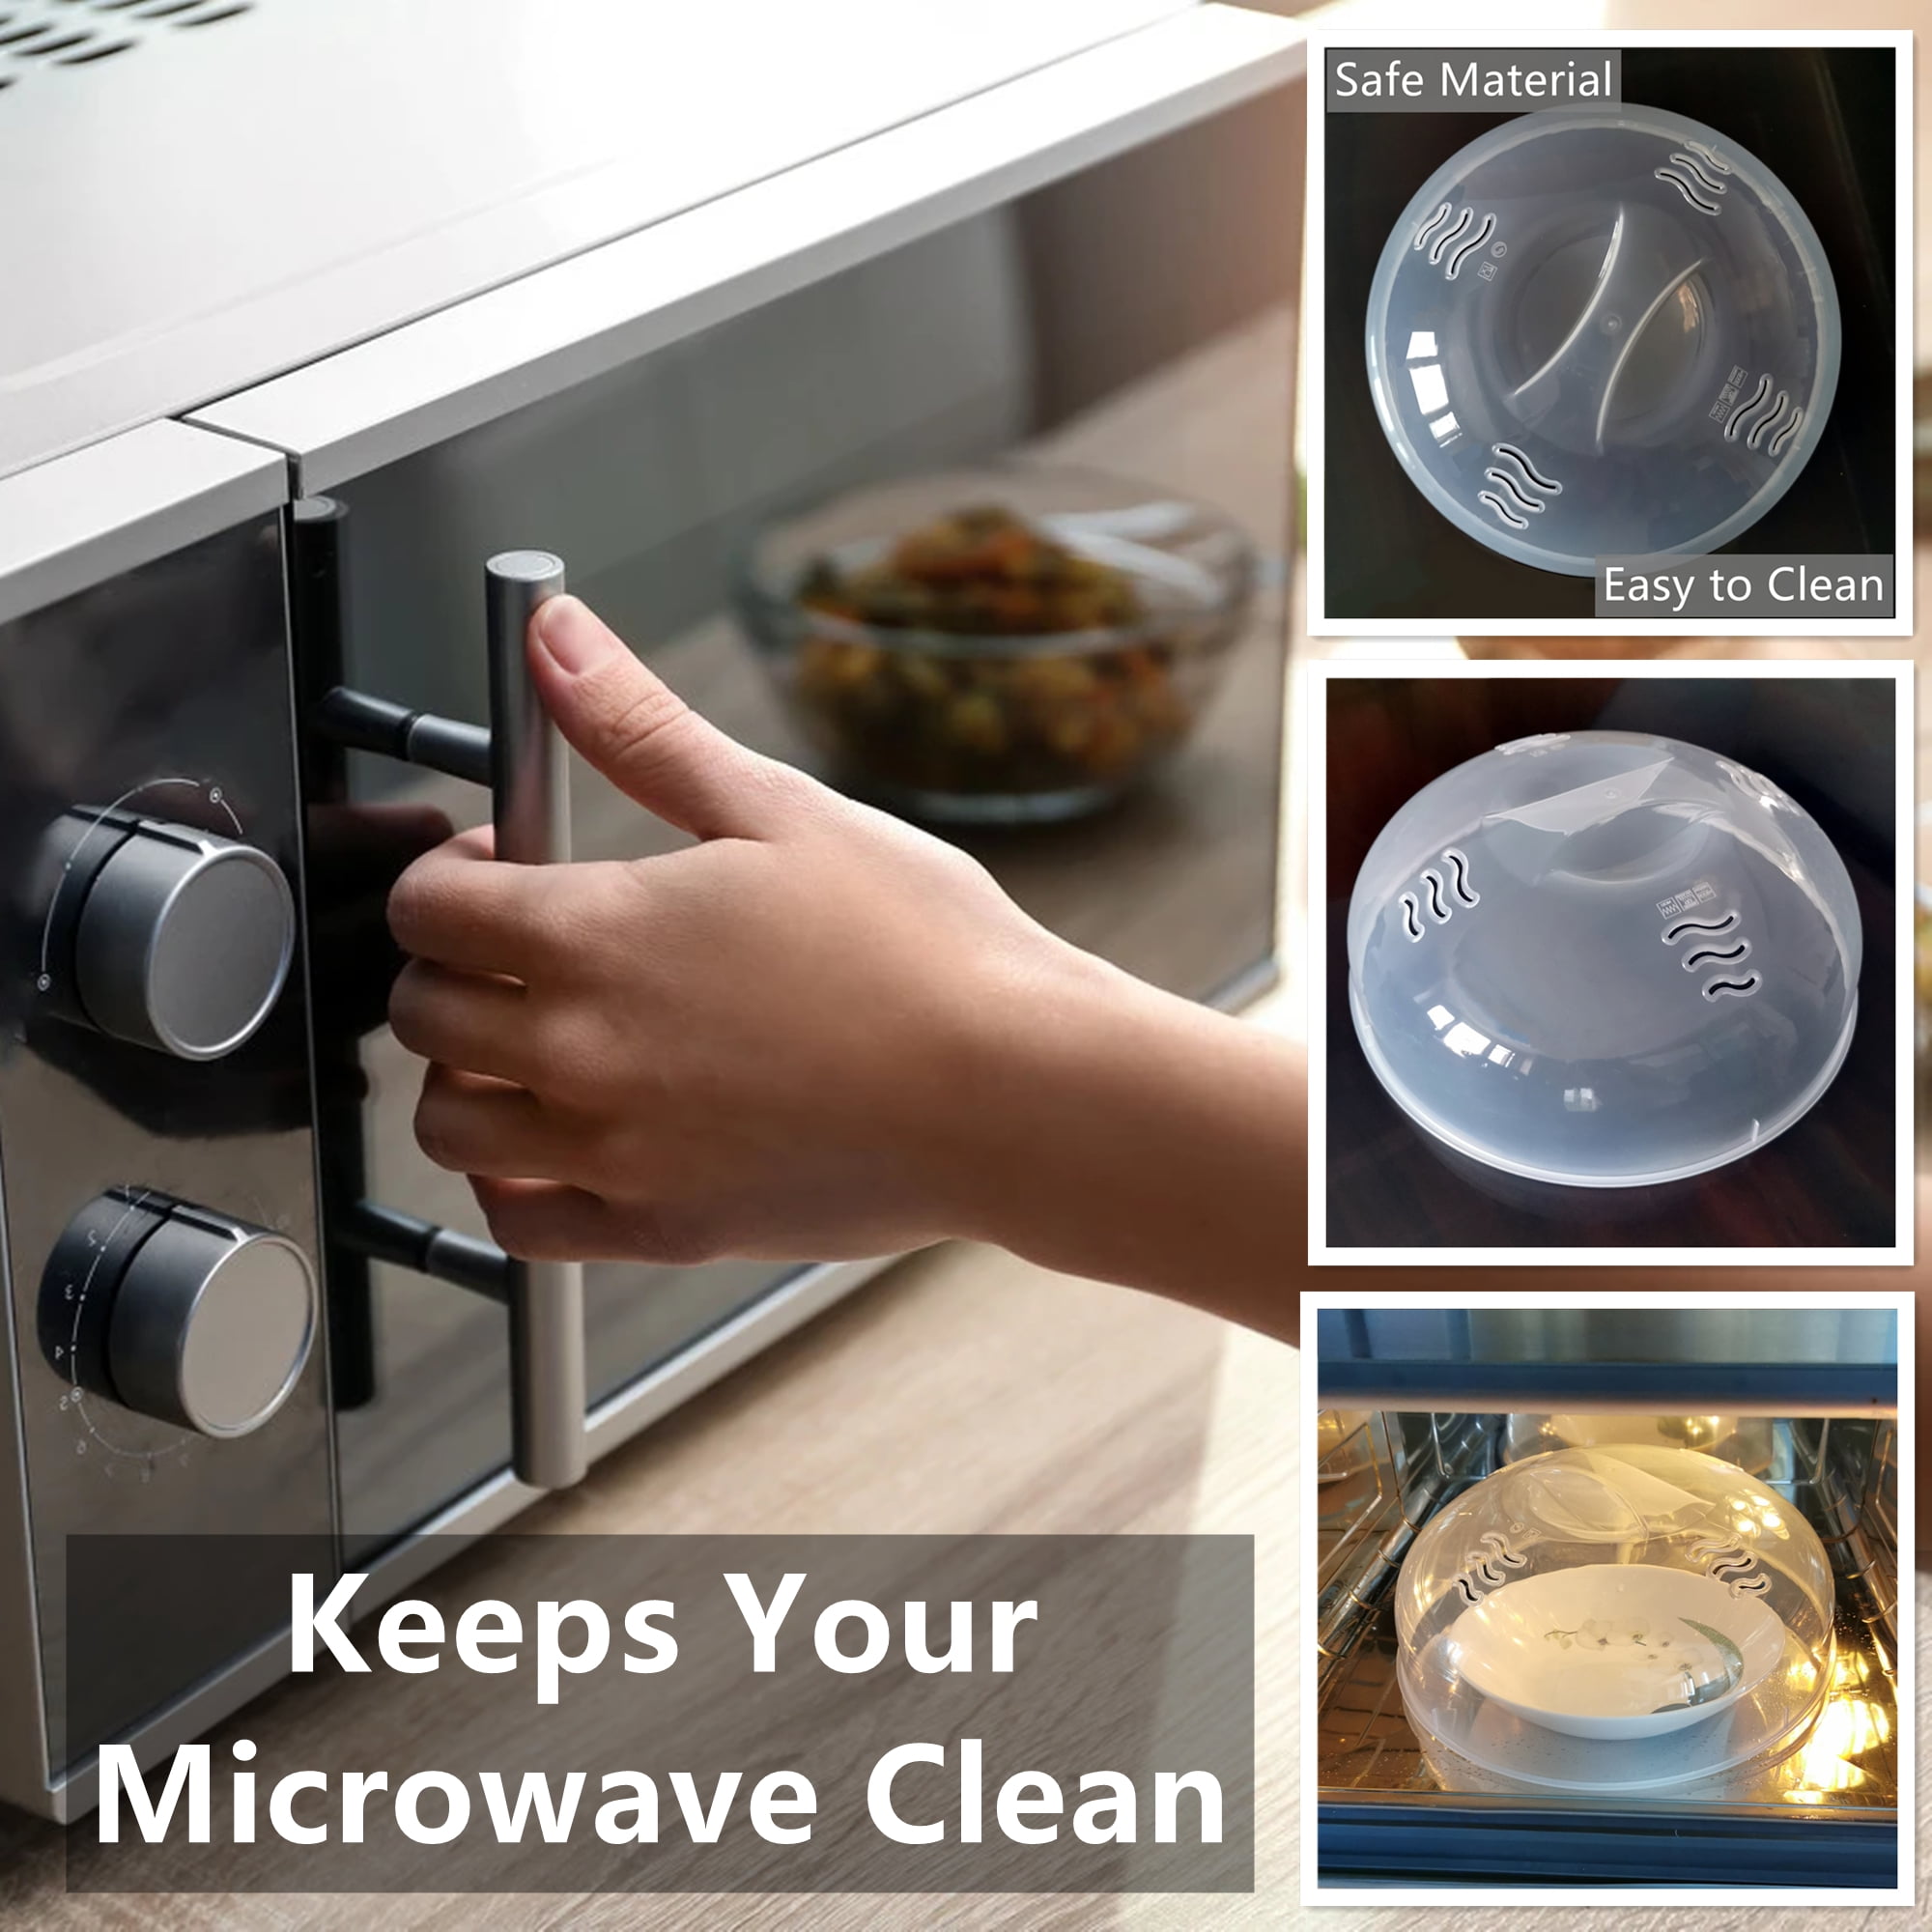 Up To 31% Off on Microwave Splatter Guard Cove